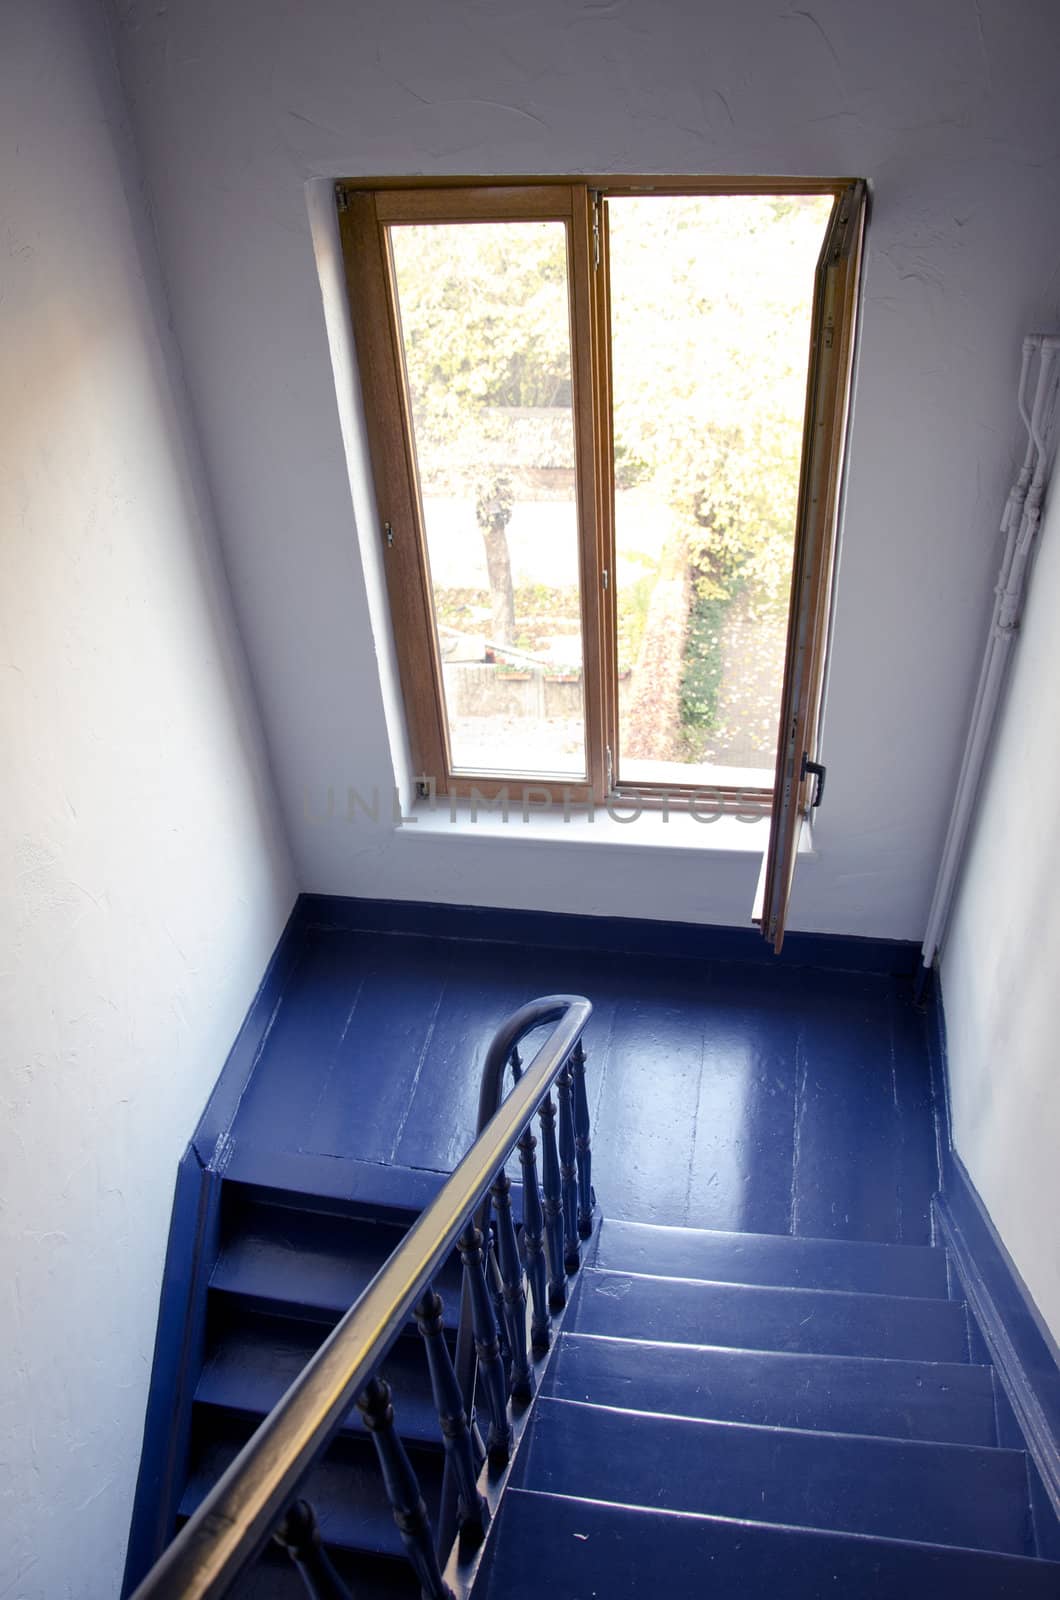 blue staircase and window in the old house